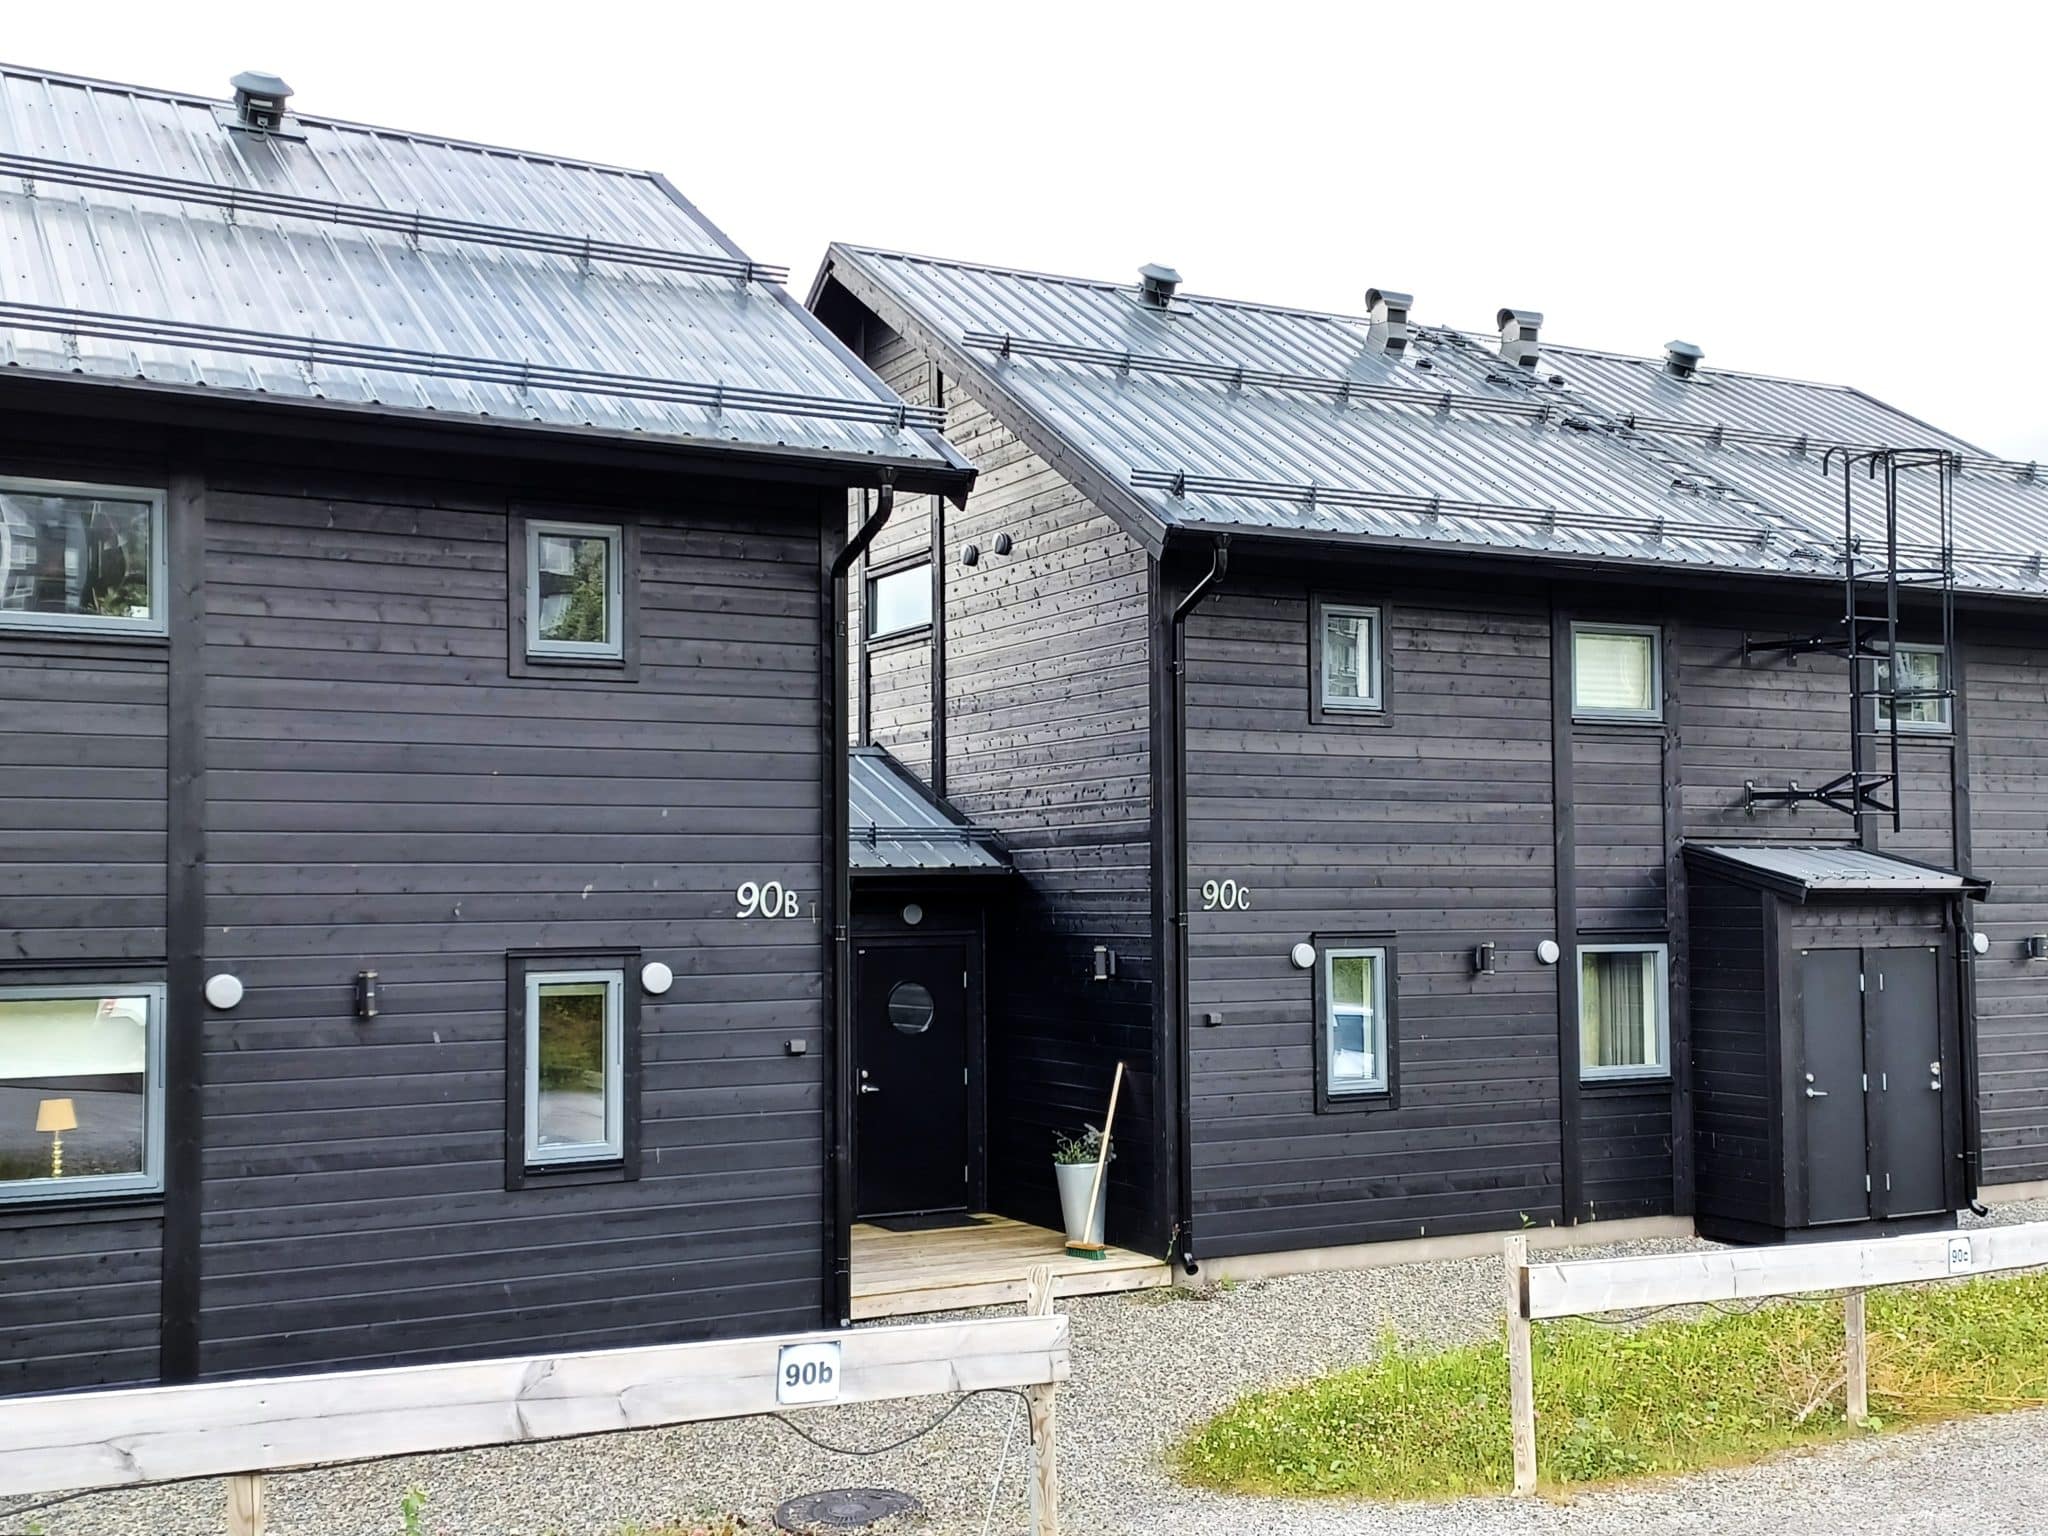 Black semi-detached houses with gray tin roofs on two levels. The houses are tied together by their entrances, which are in a small single-storey extension between each house body. On the facade of the house there is a ski storage room and a fire escape. The ground in front of the house is shingle and there is a small lawn and a low wooden fence separating the property's parking spaces.